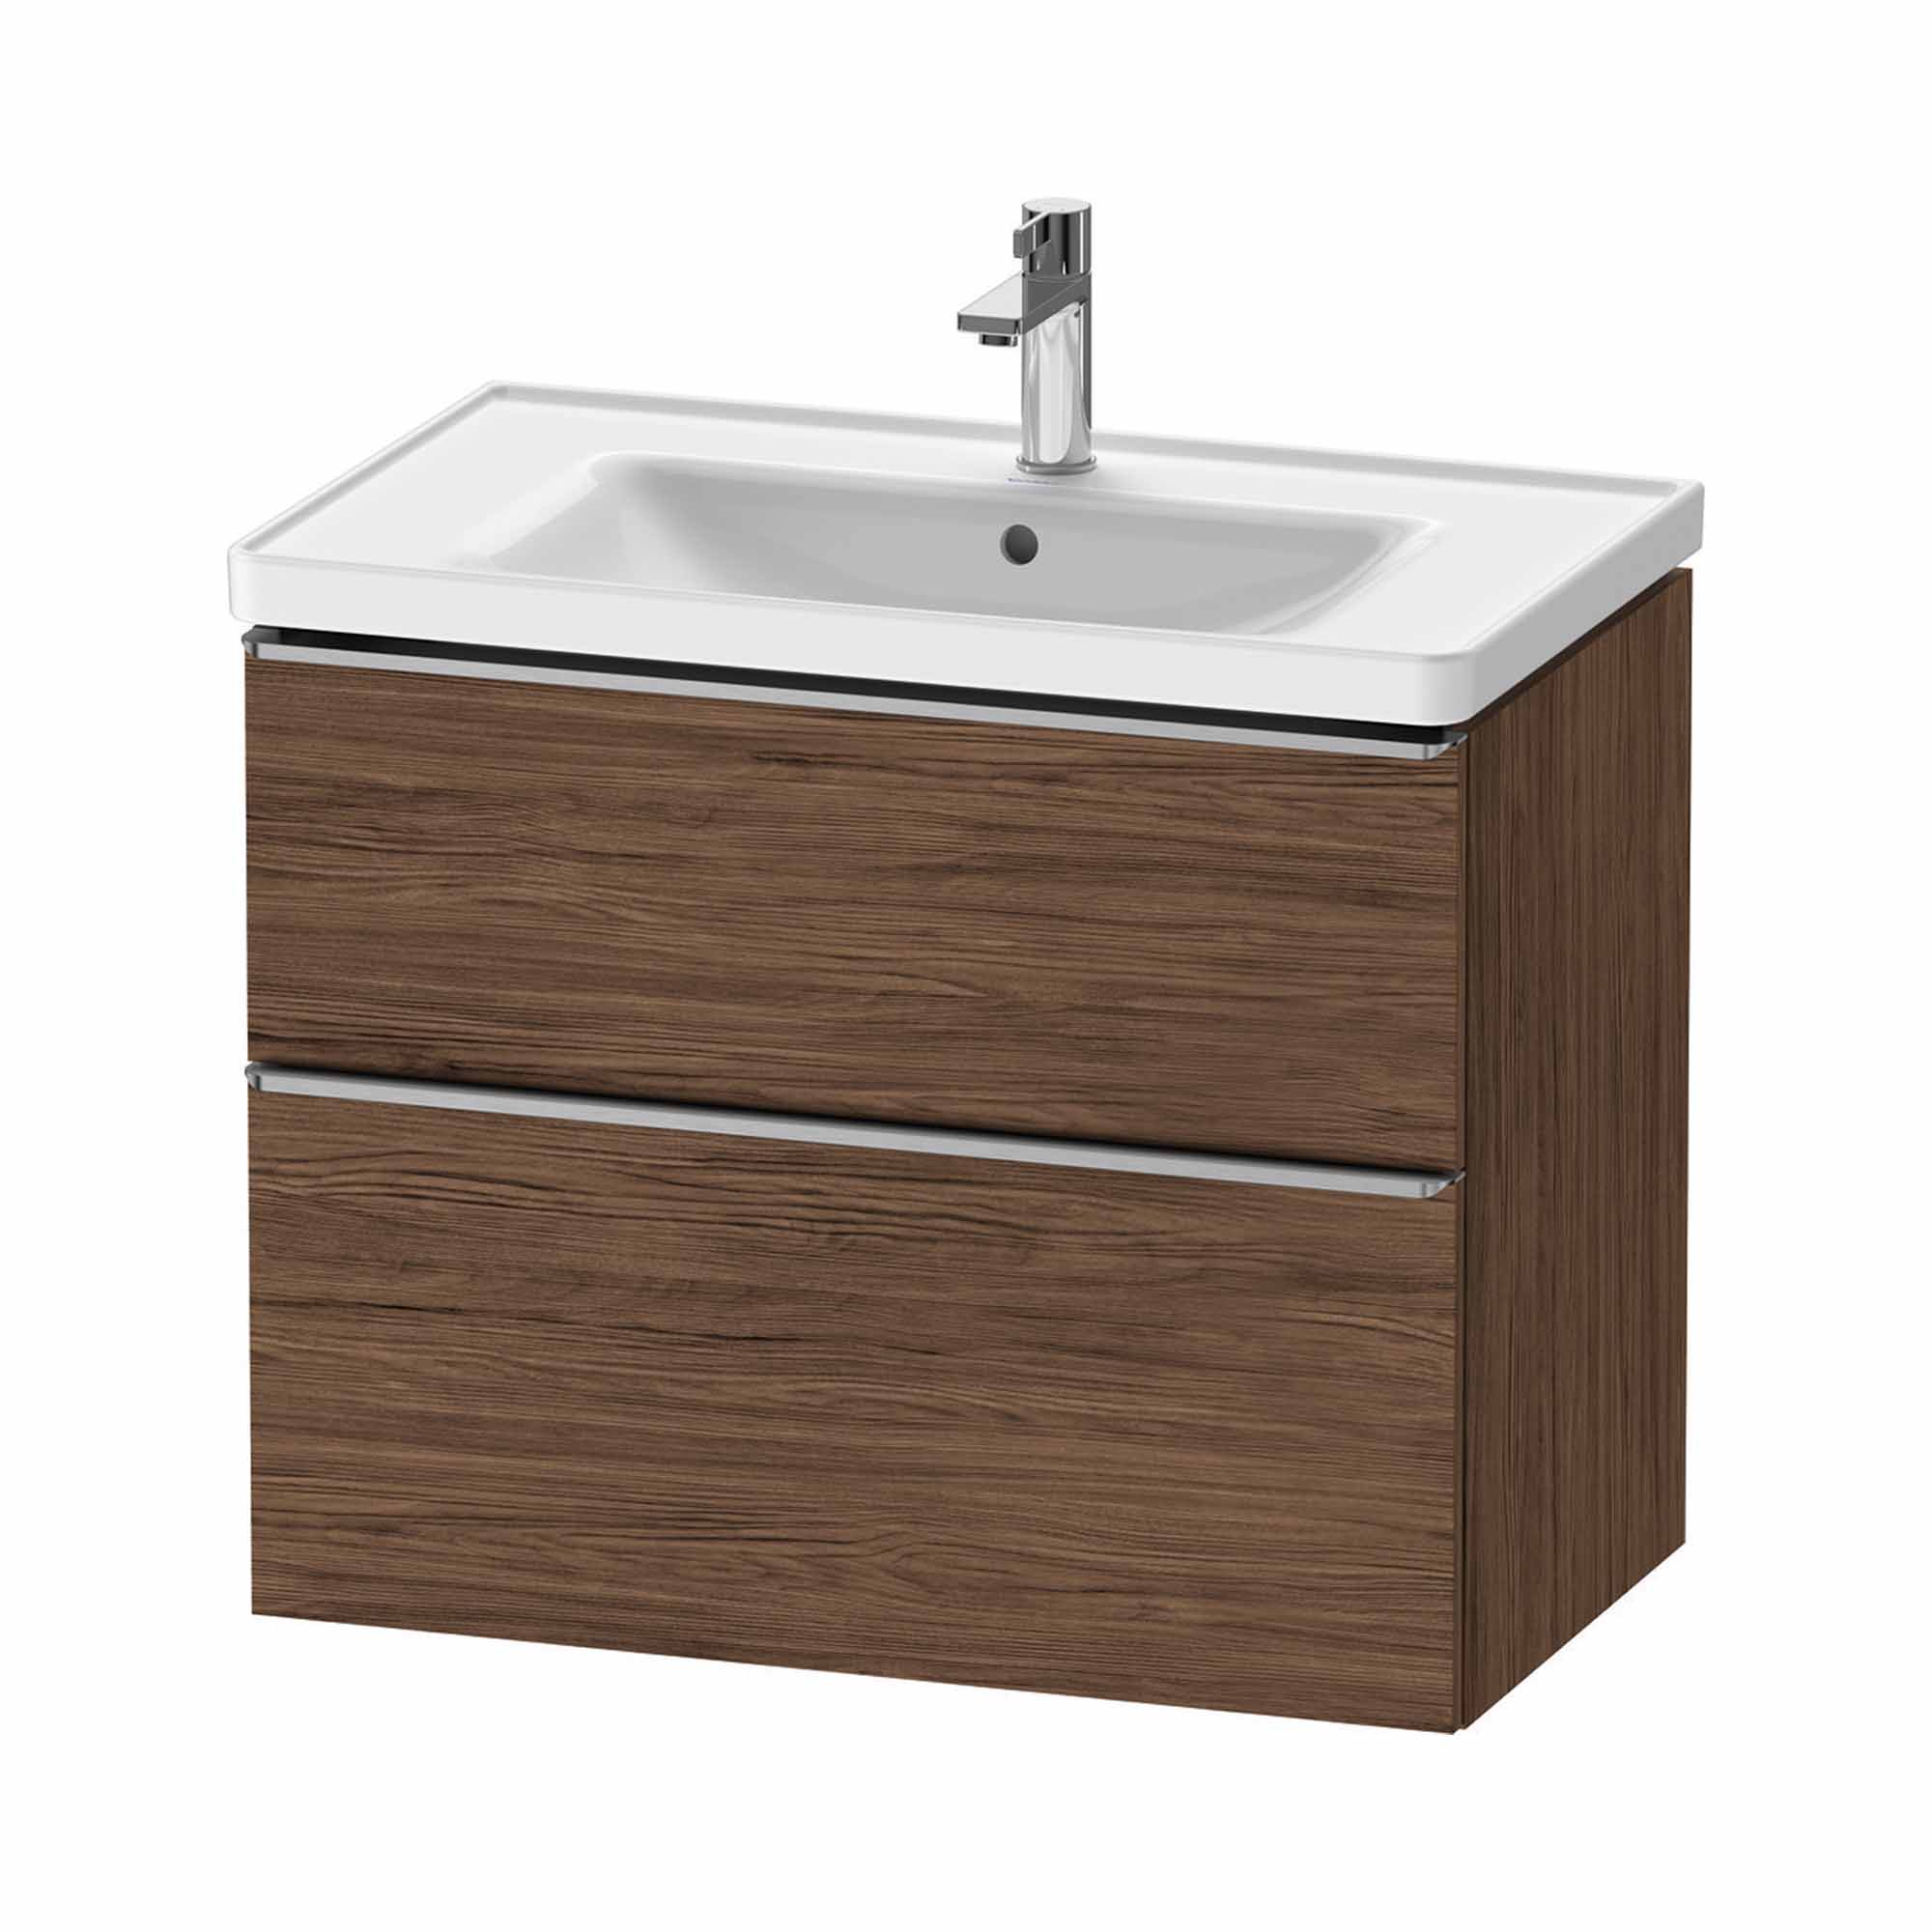 duravit d-neo 800mm wall mounted vanity unit with d-neo basin dark walnut stainless steel handles